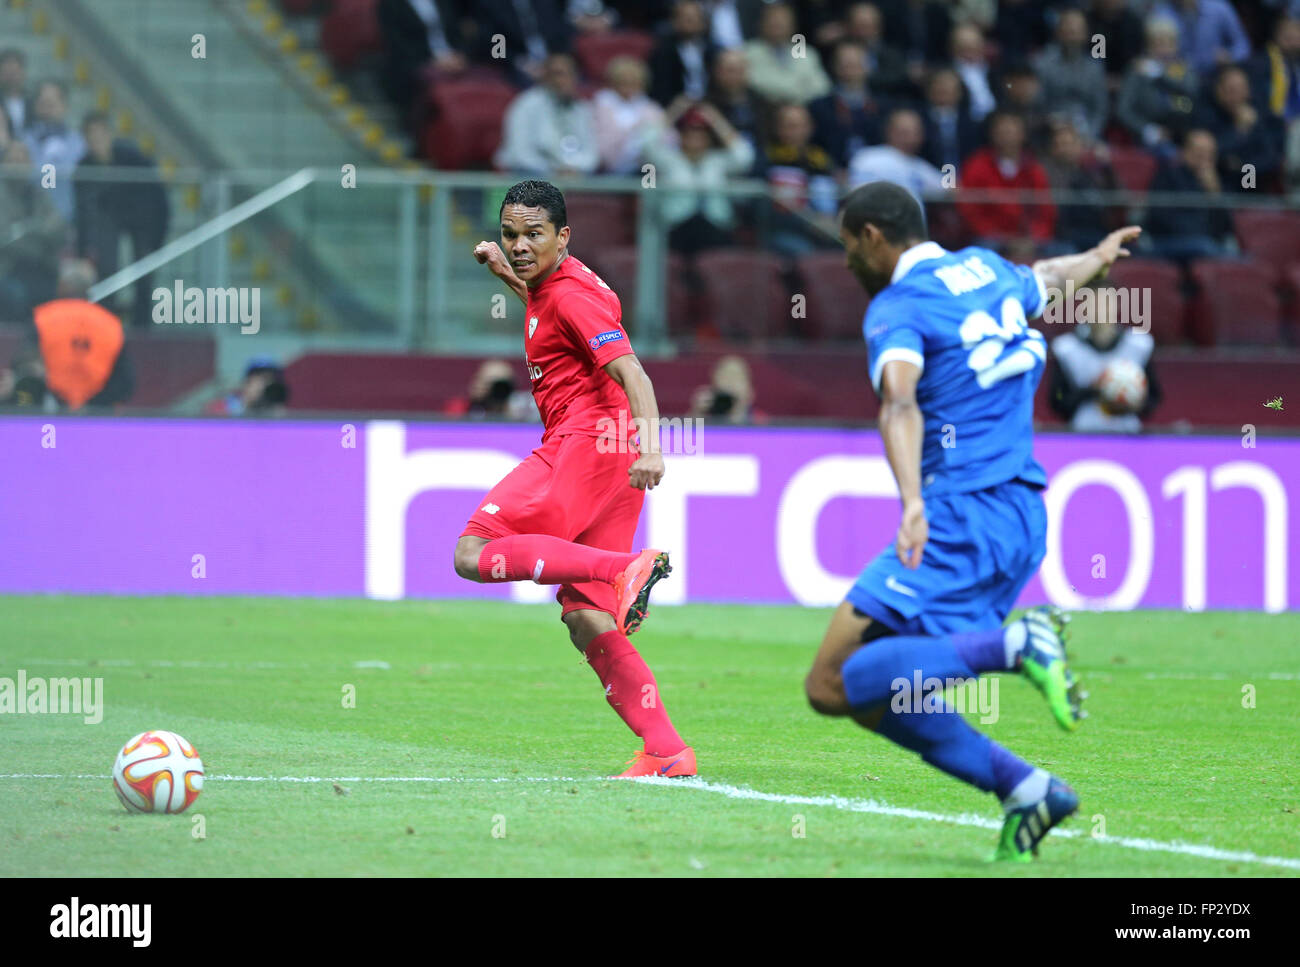 WARSAW, POLAND - MAY 27, 2015: Carlos Bacca (in Red) of FC Sevilla scores a goal during UEFA Europa League Final game against FC Dnipro at Warsaw National Stadium Stock Photo